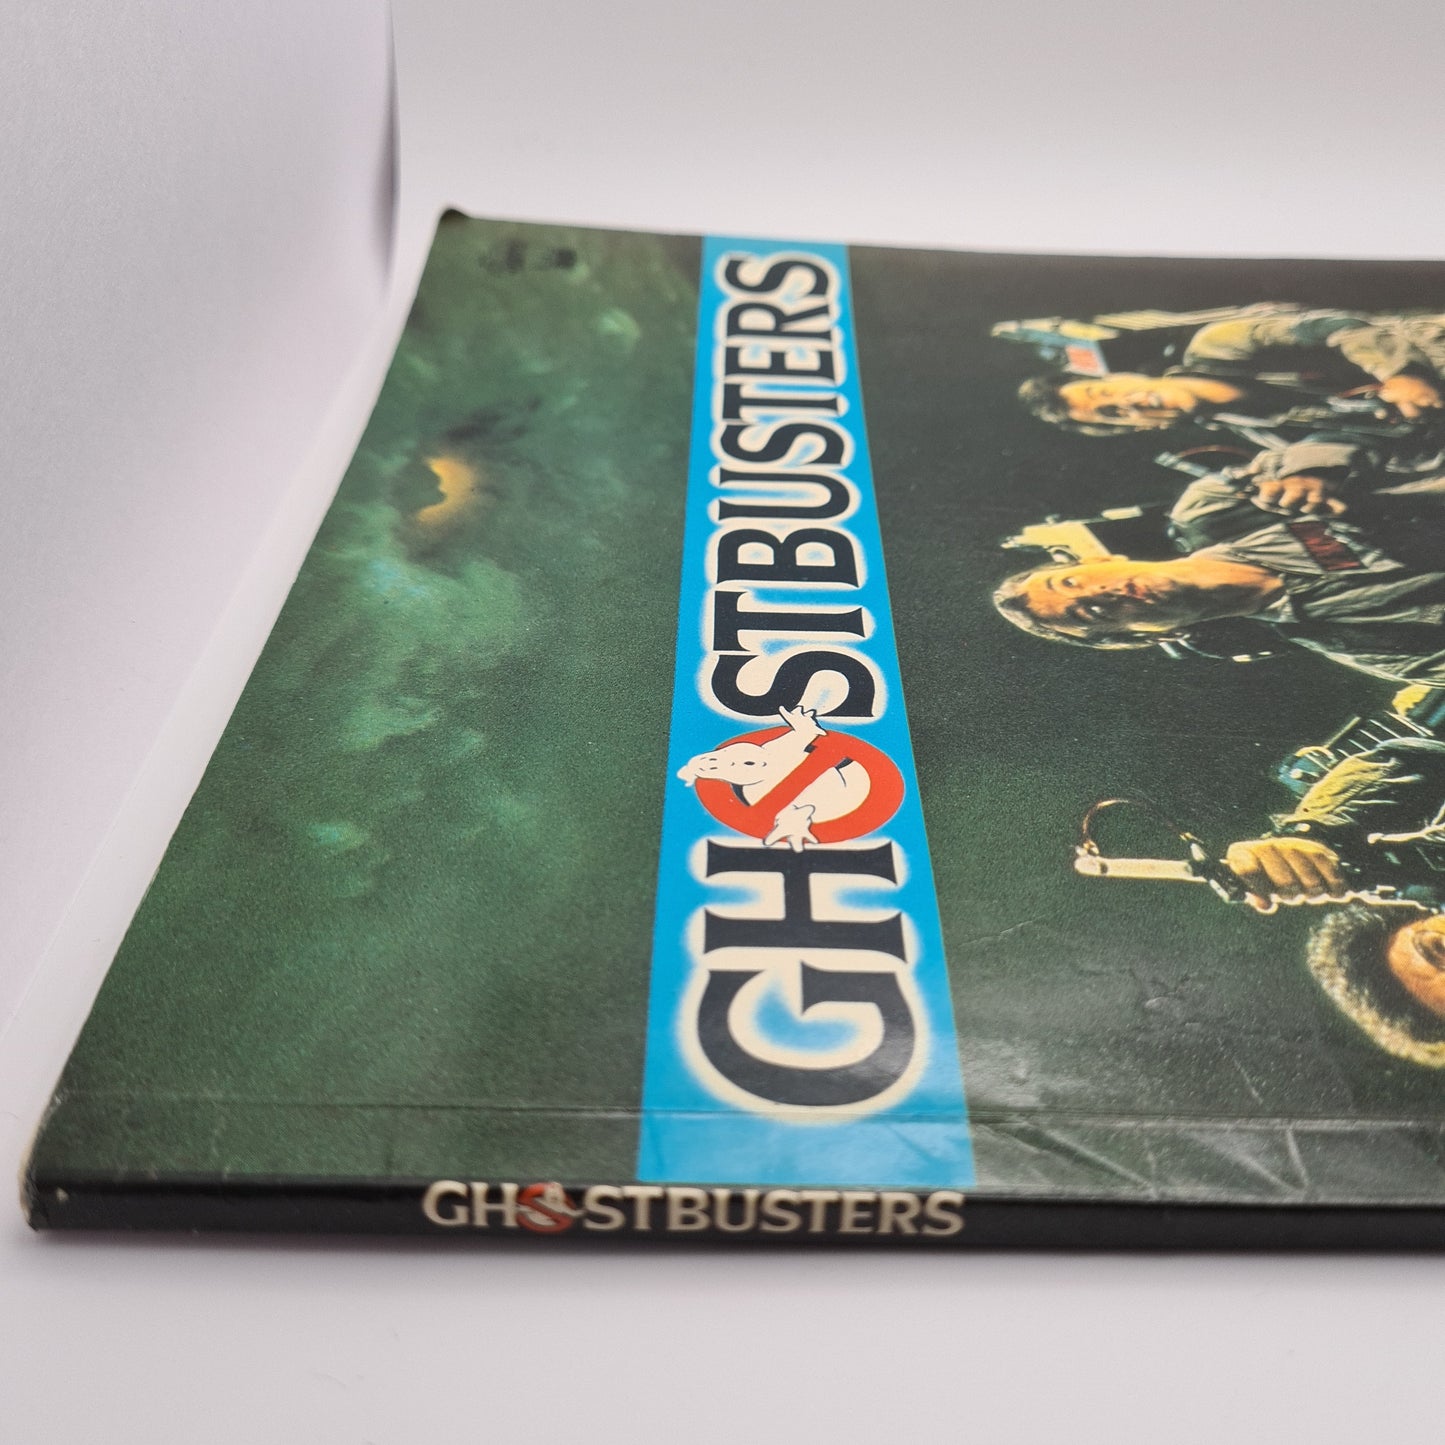 Ghostbusters Movie Story Book 1984 Used